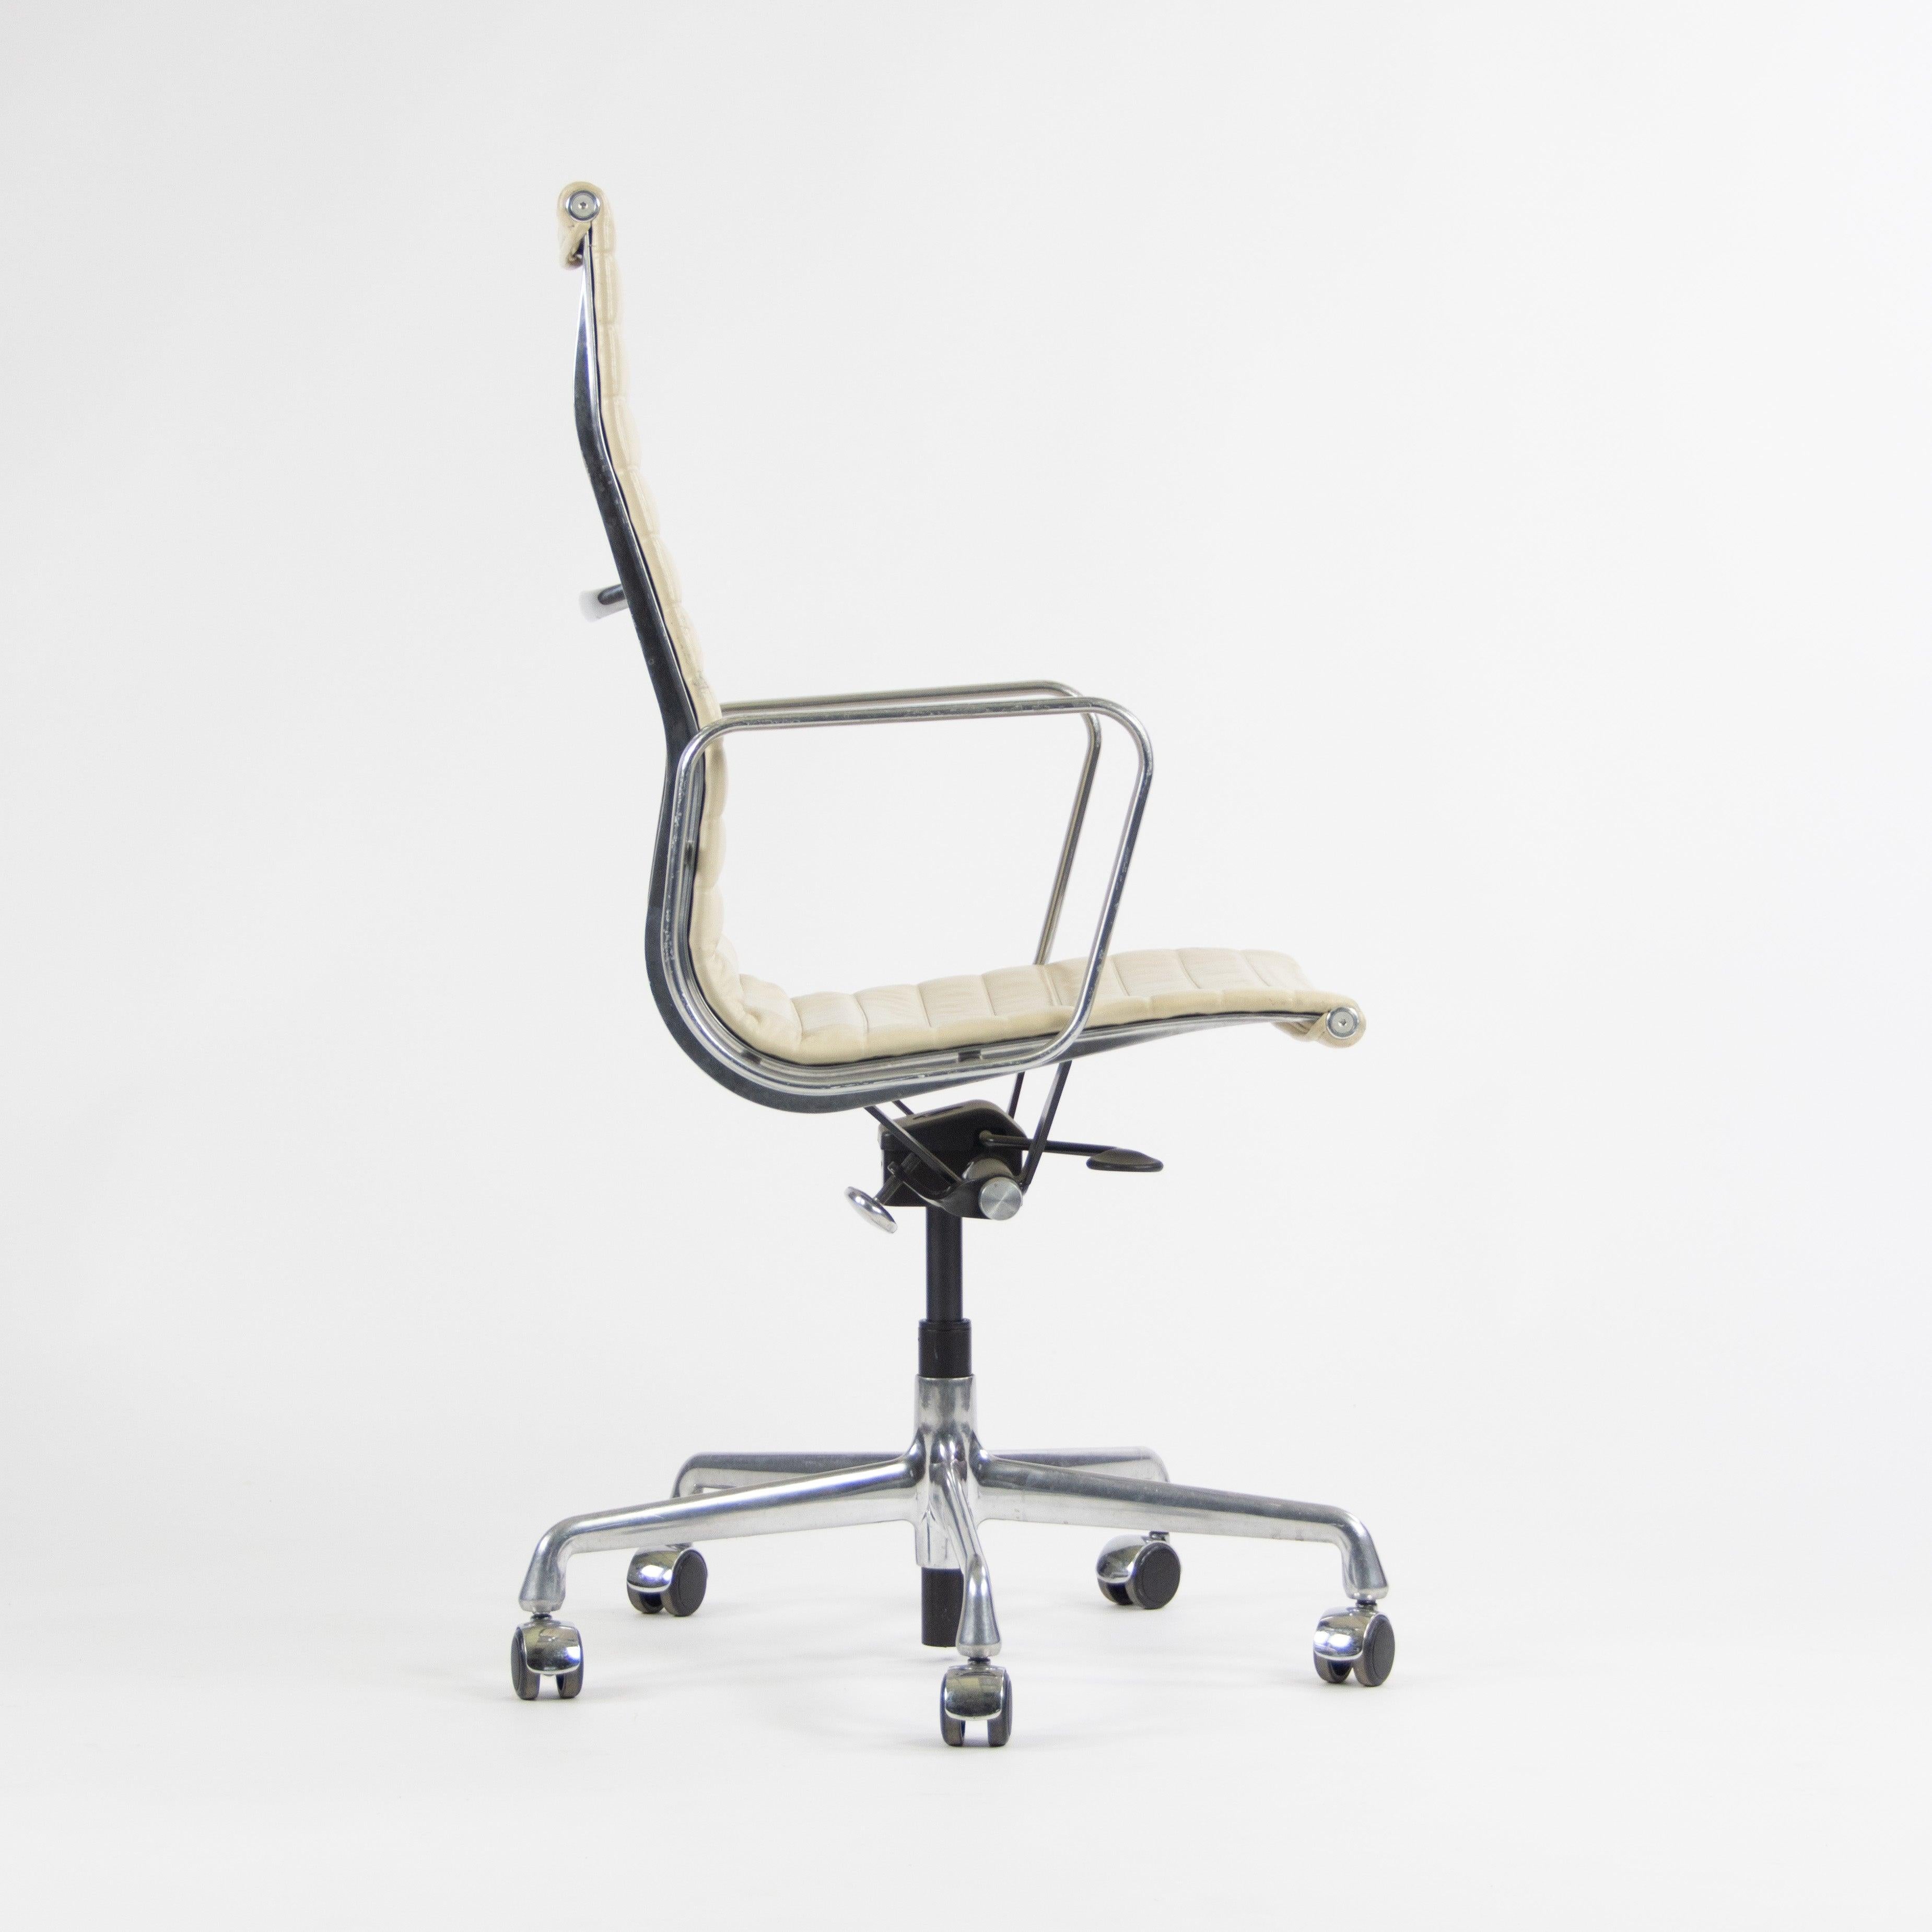 American Herman Miller Eames 2011 Executive Aluminum Group Desk Chair 3x Available Ivory For Sale